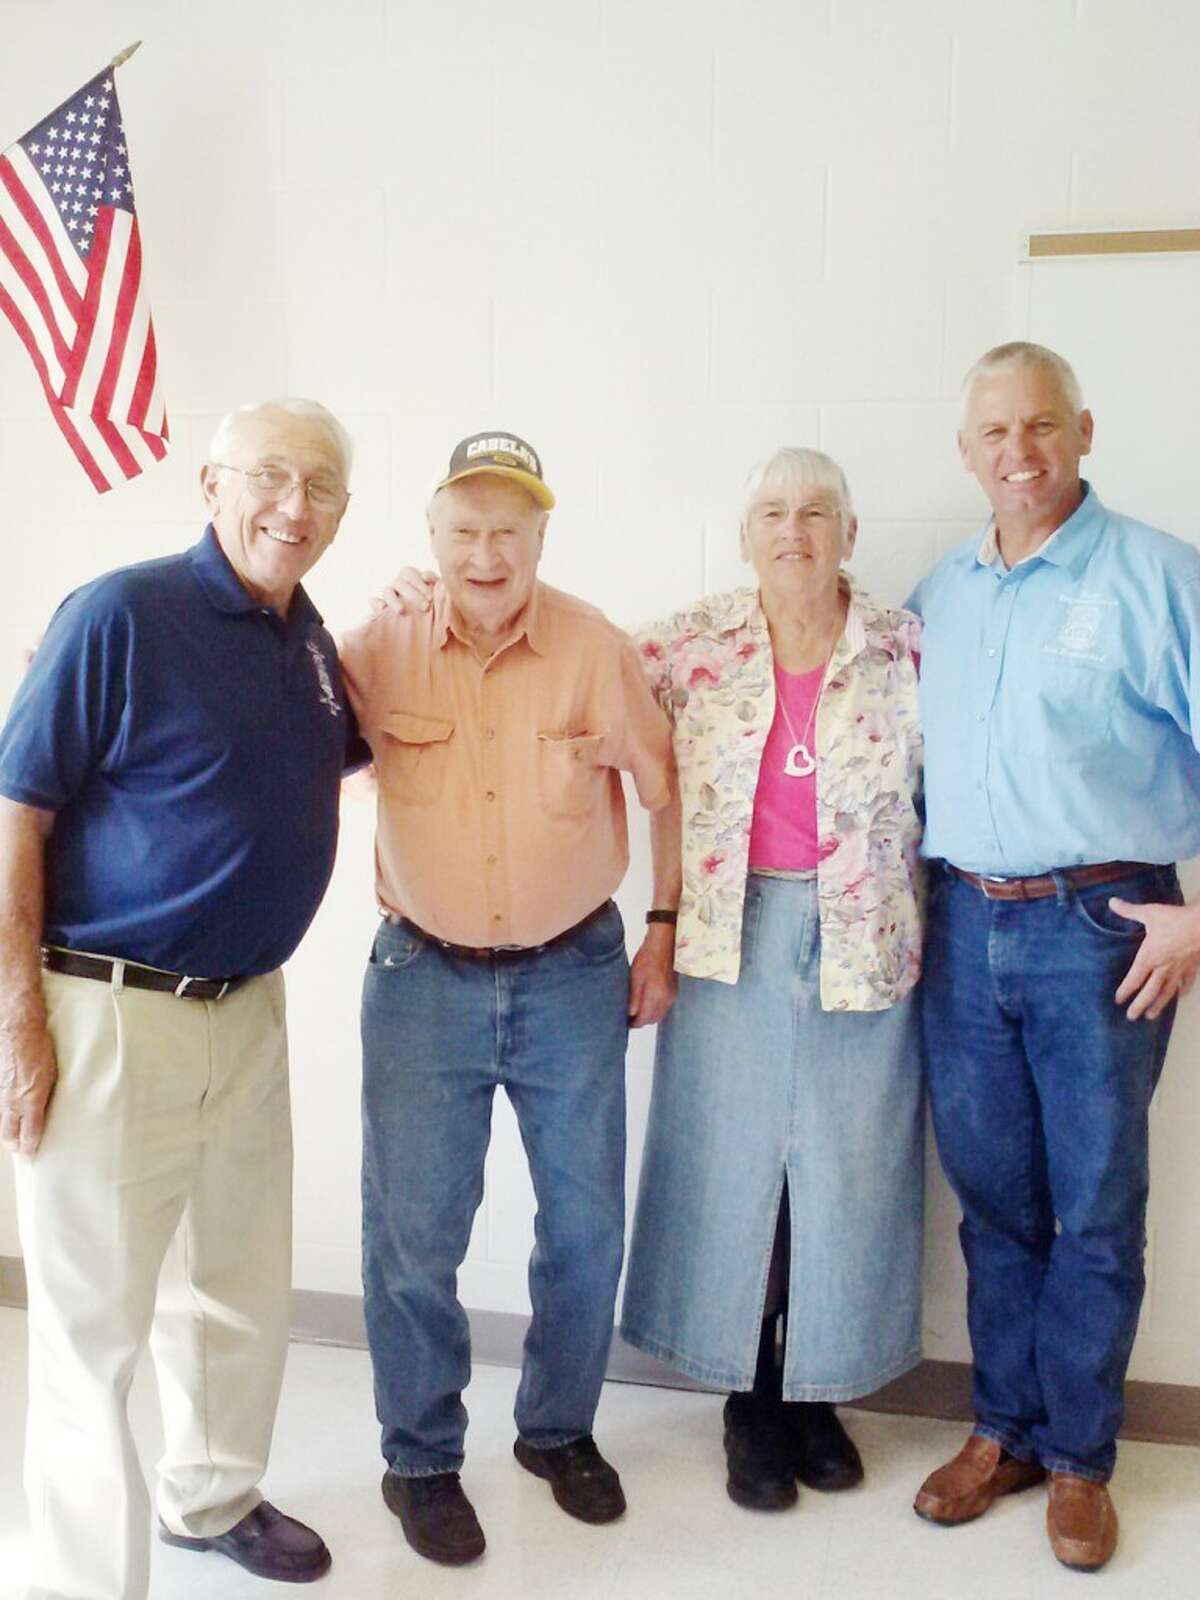 HELPING OUT: Volunteering at Maxine’s Closet are (from left to right) Wayne Bumstead, Bill Martin, Beverly Bumstead and Jon Bumstead. (Courtesy photo)